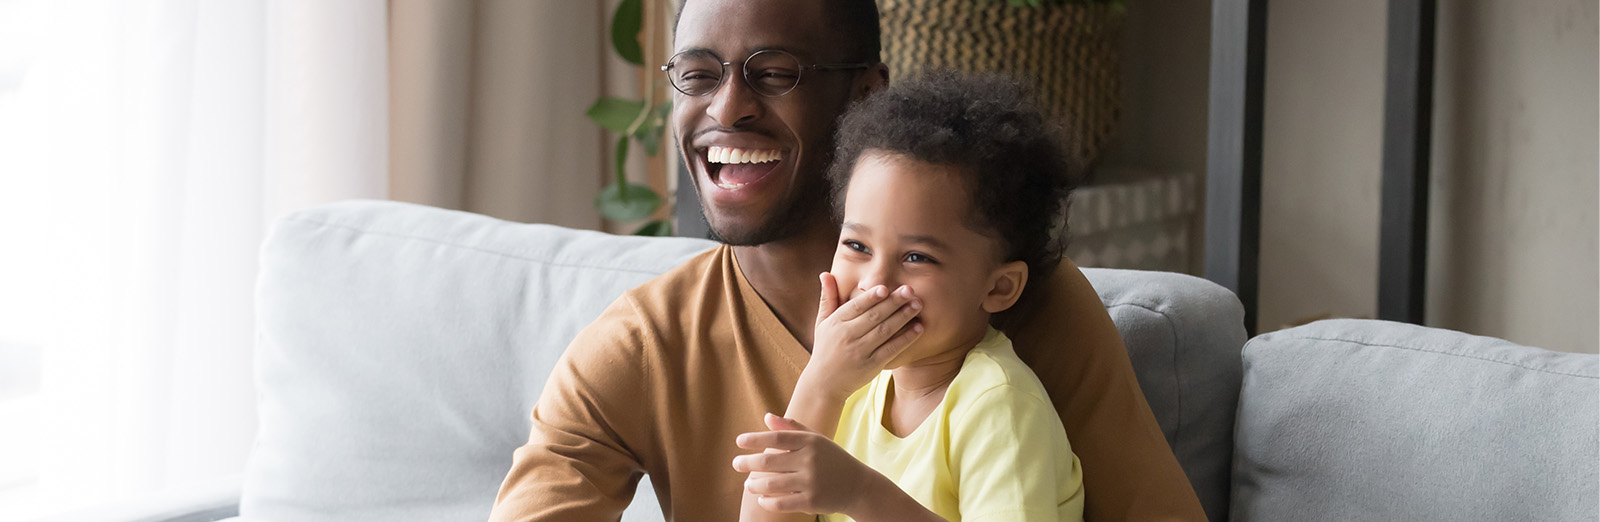 A young dad with a cute preschool aged child on his lap sitting on a couch. They are eating a big bowl of popcorn and laughing looking presumably toward a television. 